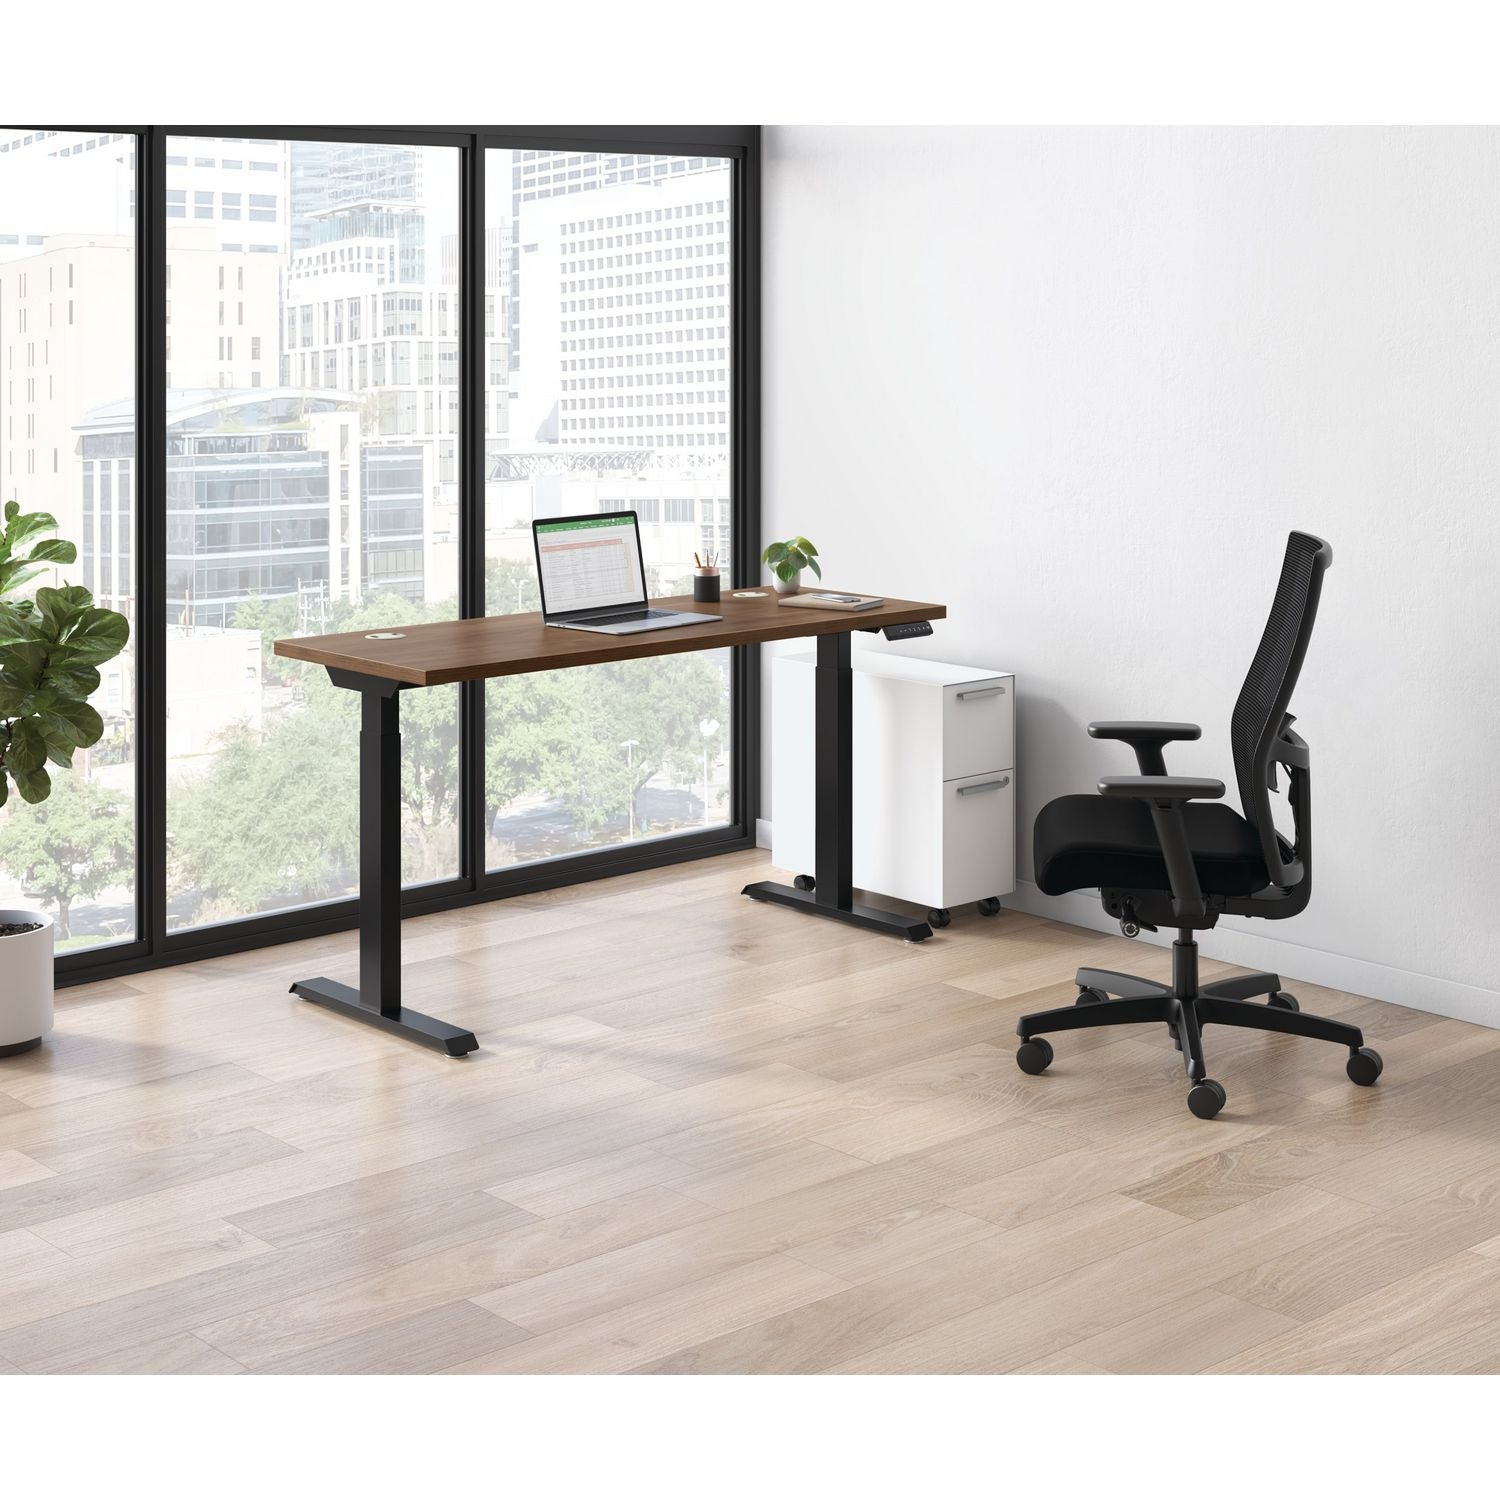 coordinate-height-adjustable-desk-bundle-2-stage-58-x-22-x-2775-to-47-pinnacle\\black-ships-in-7-10-business-days_honhat2spnb2258 - 6